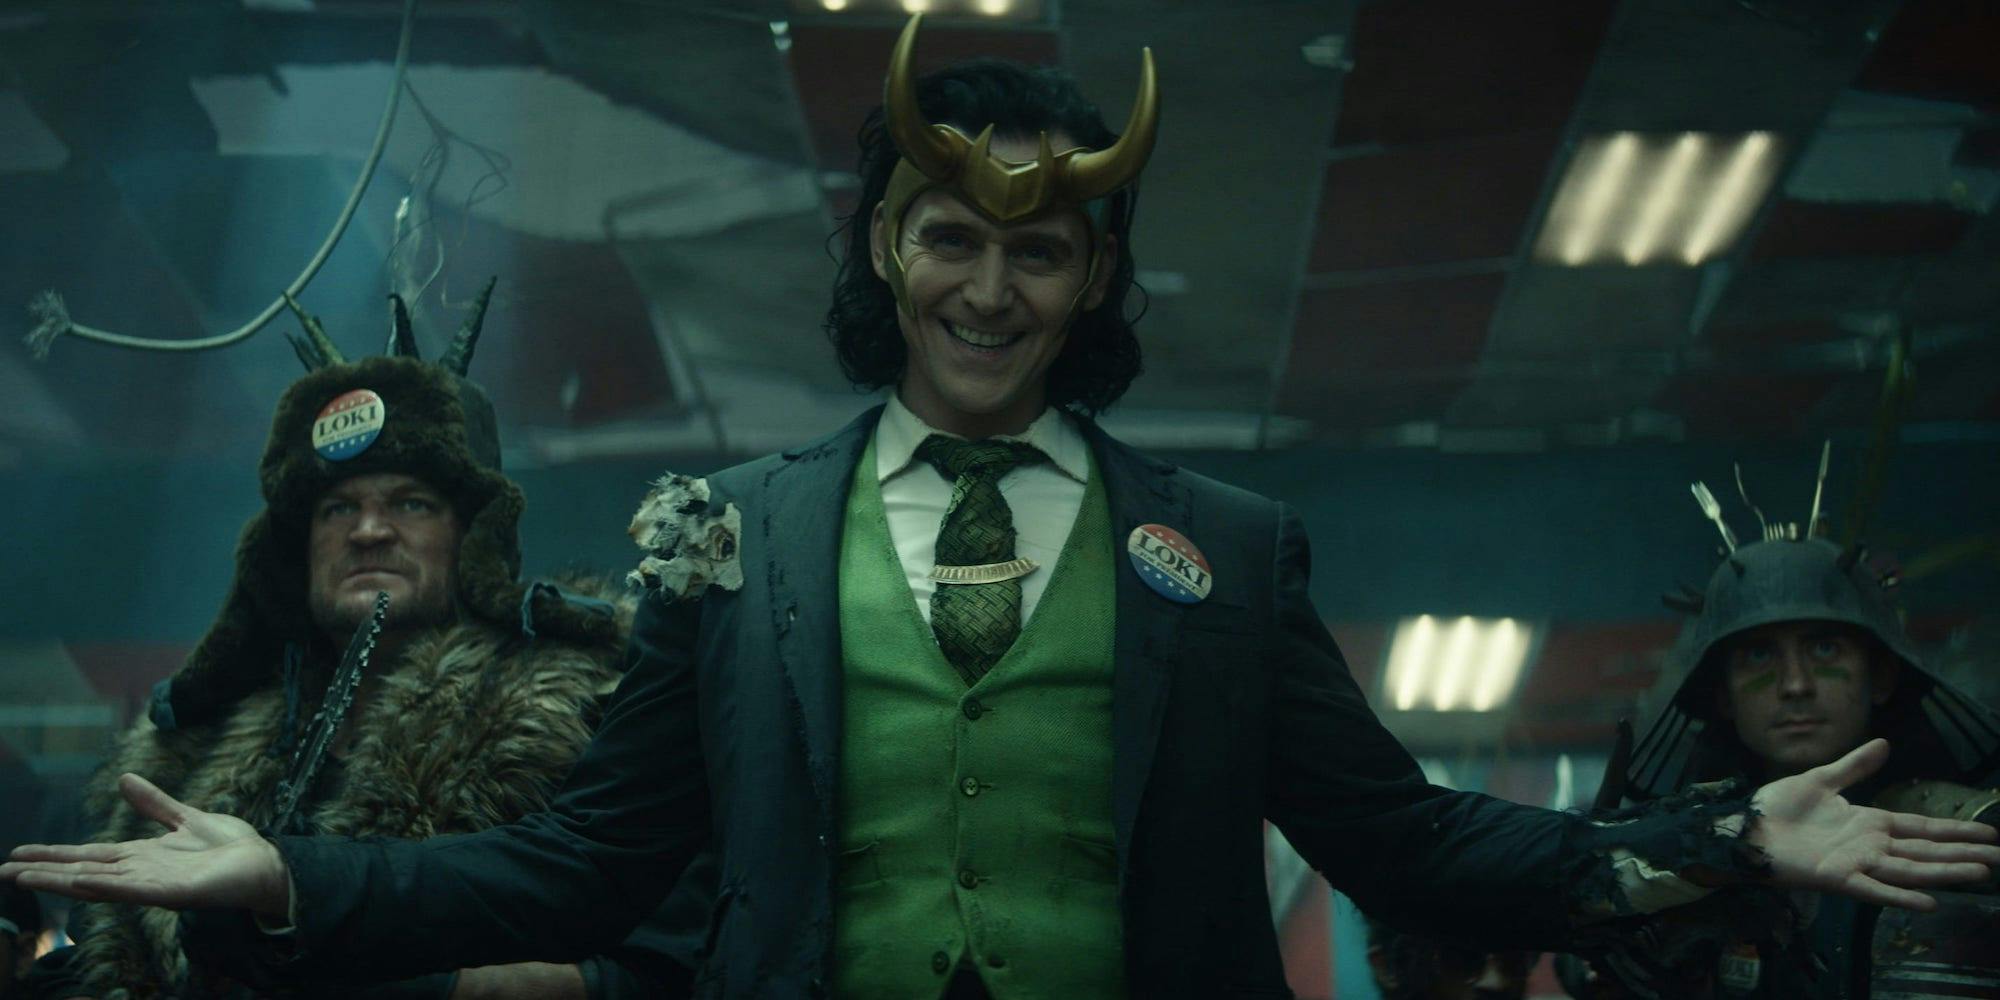 loki in the disney plus series. loki has become a genderfluid and queer icon among Marvel fans.